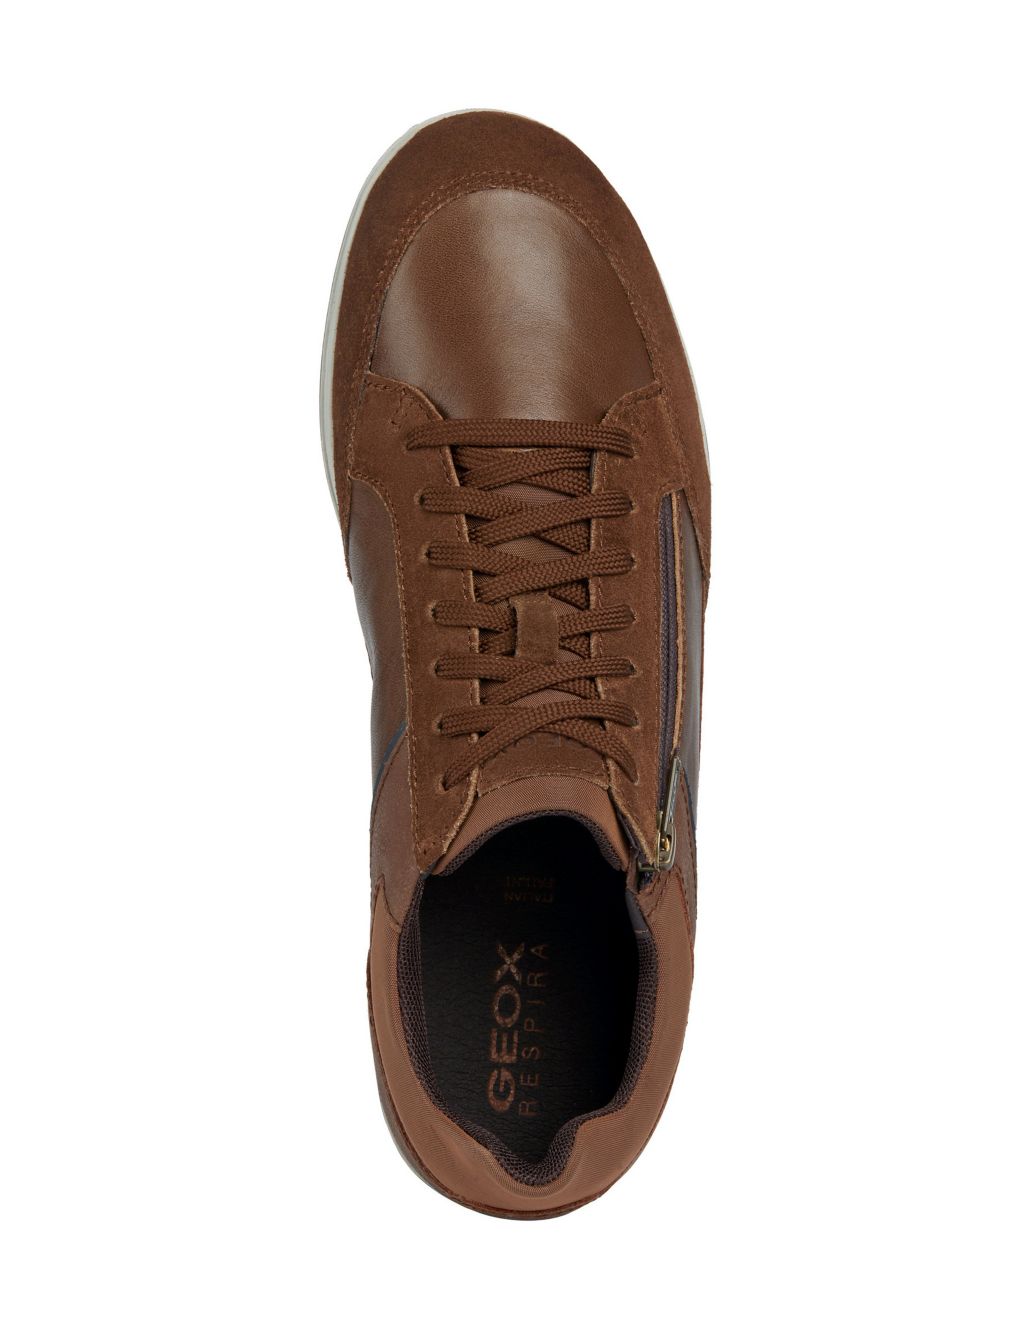 Leather & Suede Lace Up Trainers image 5